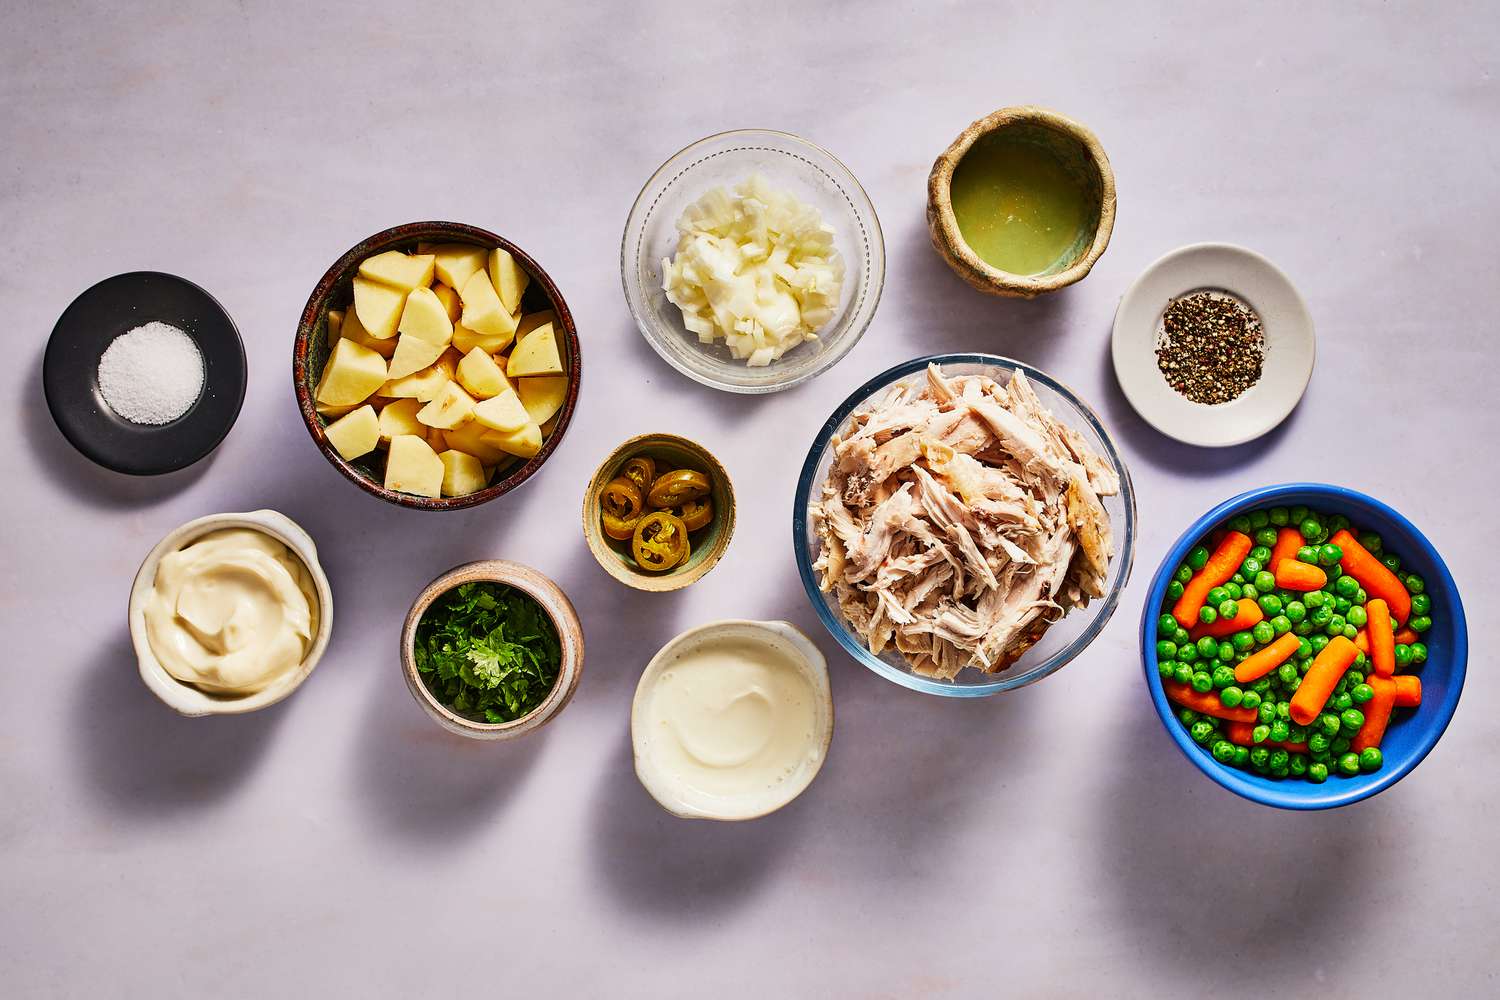 Ingredients to make Mexican chicken salad